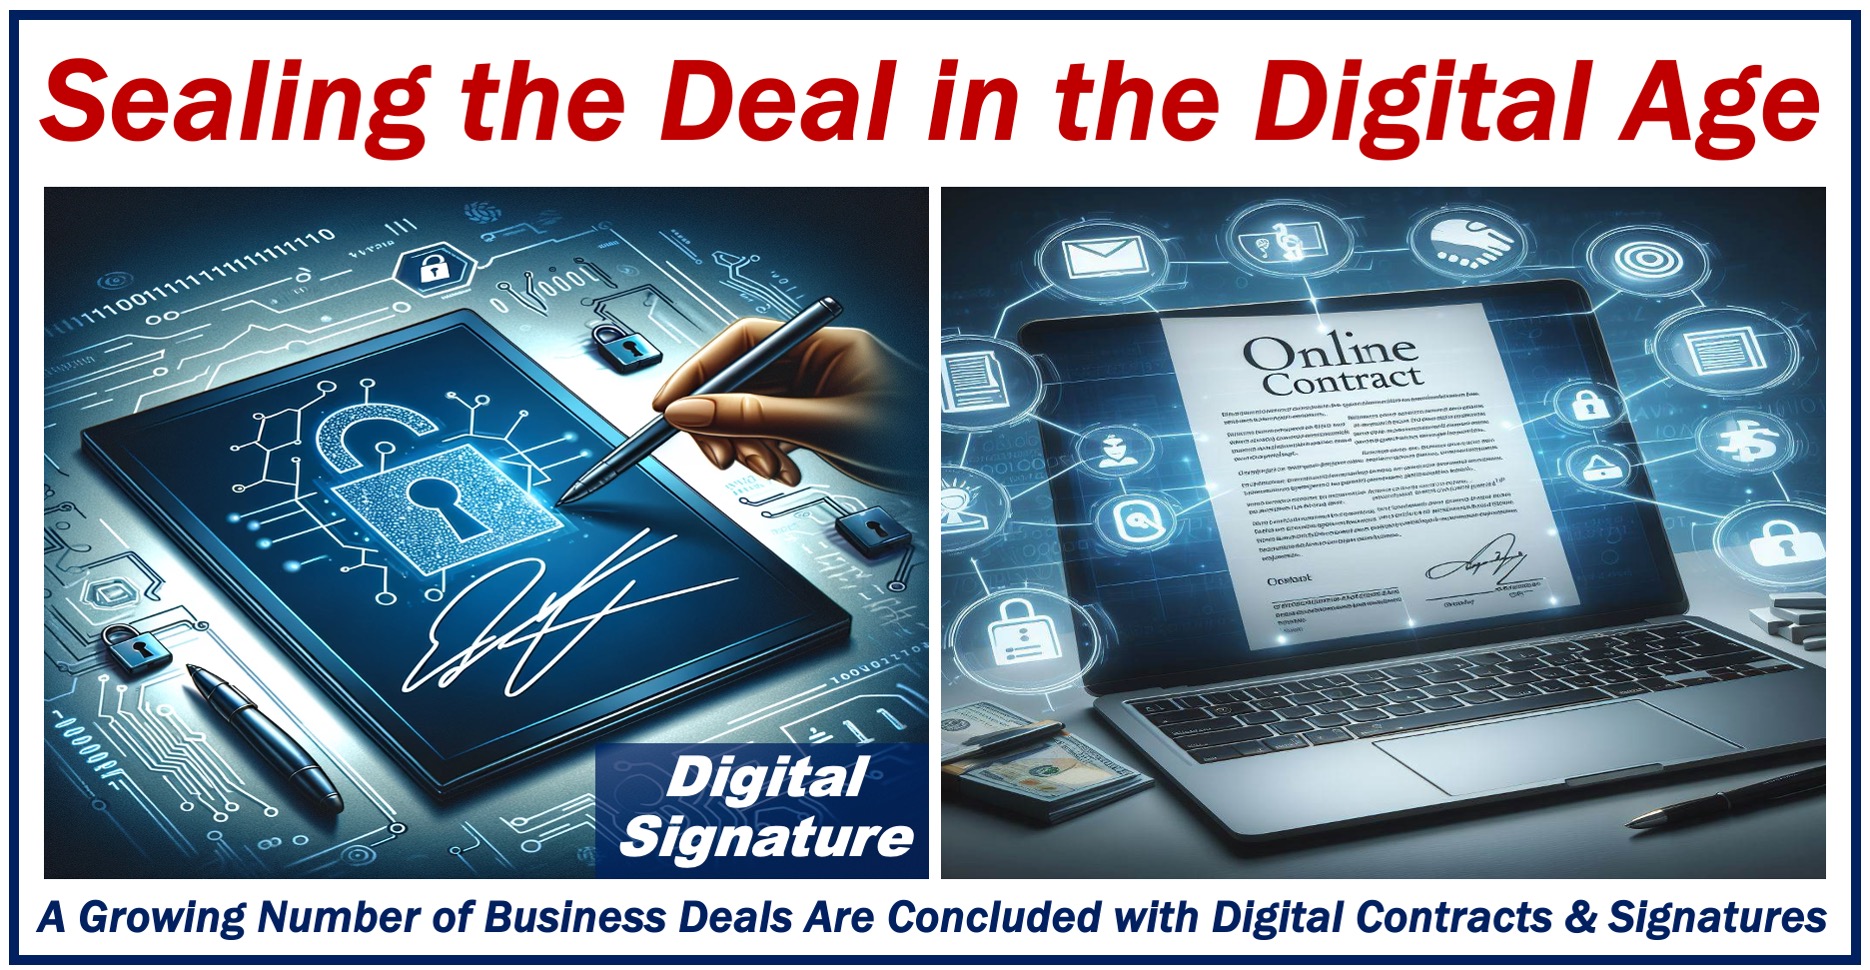 An image of a digital signature and online contract.